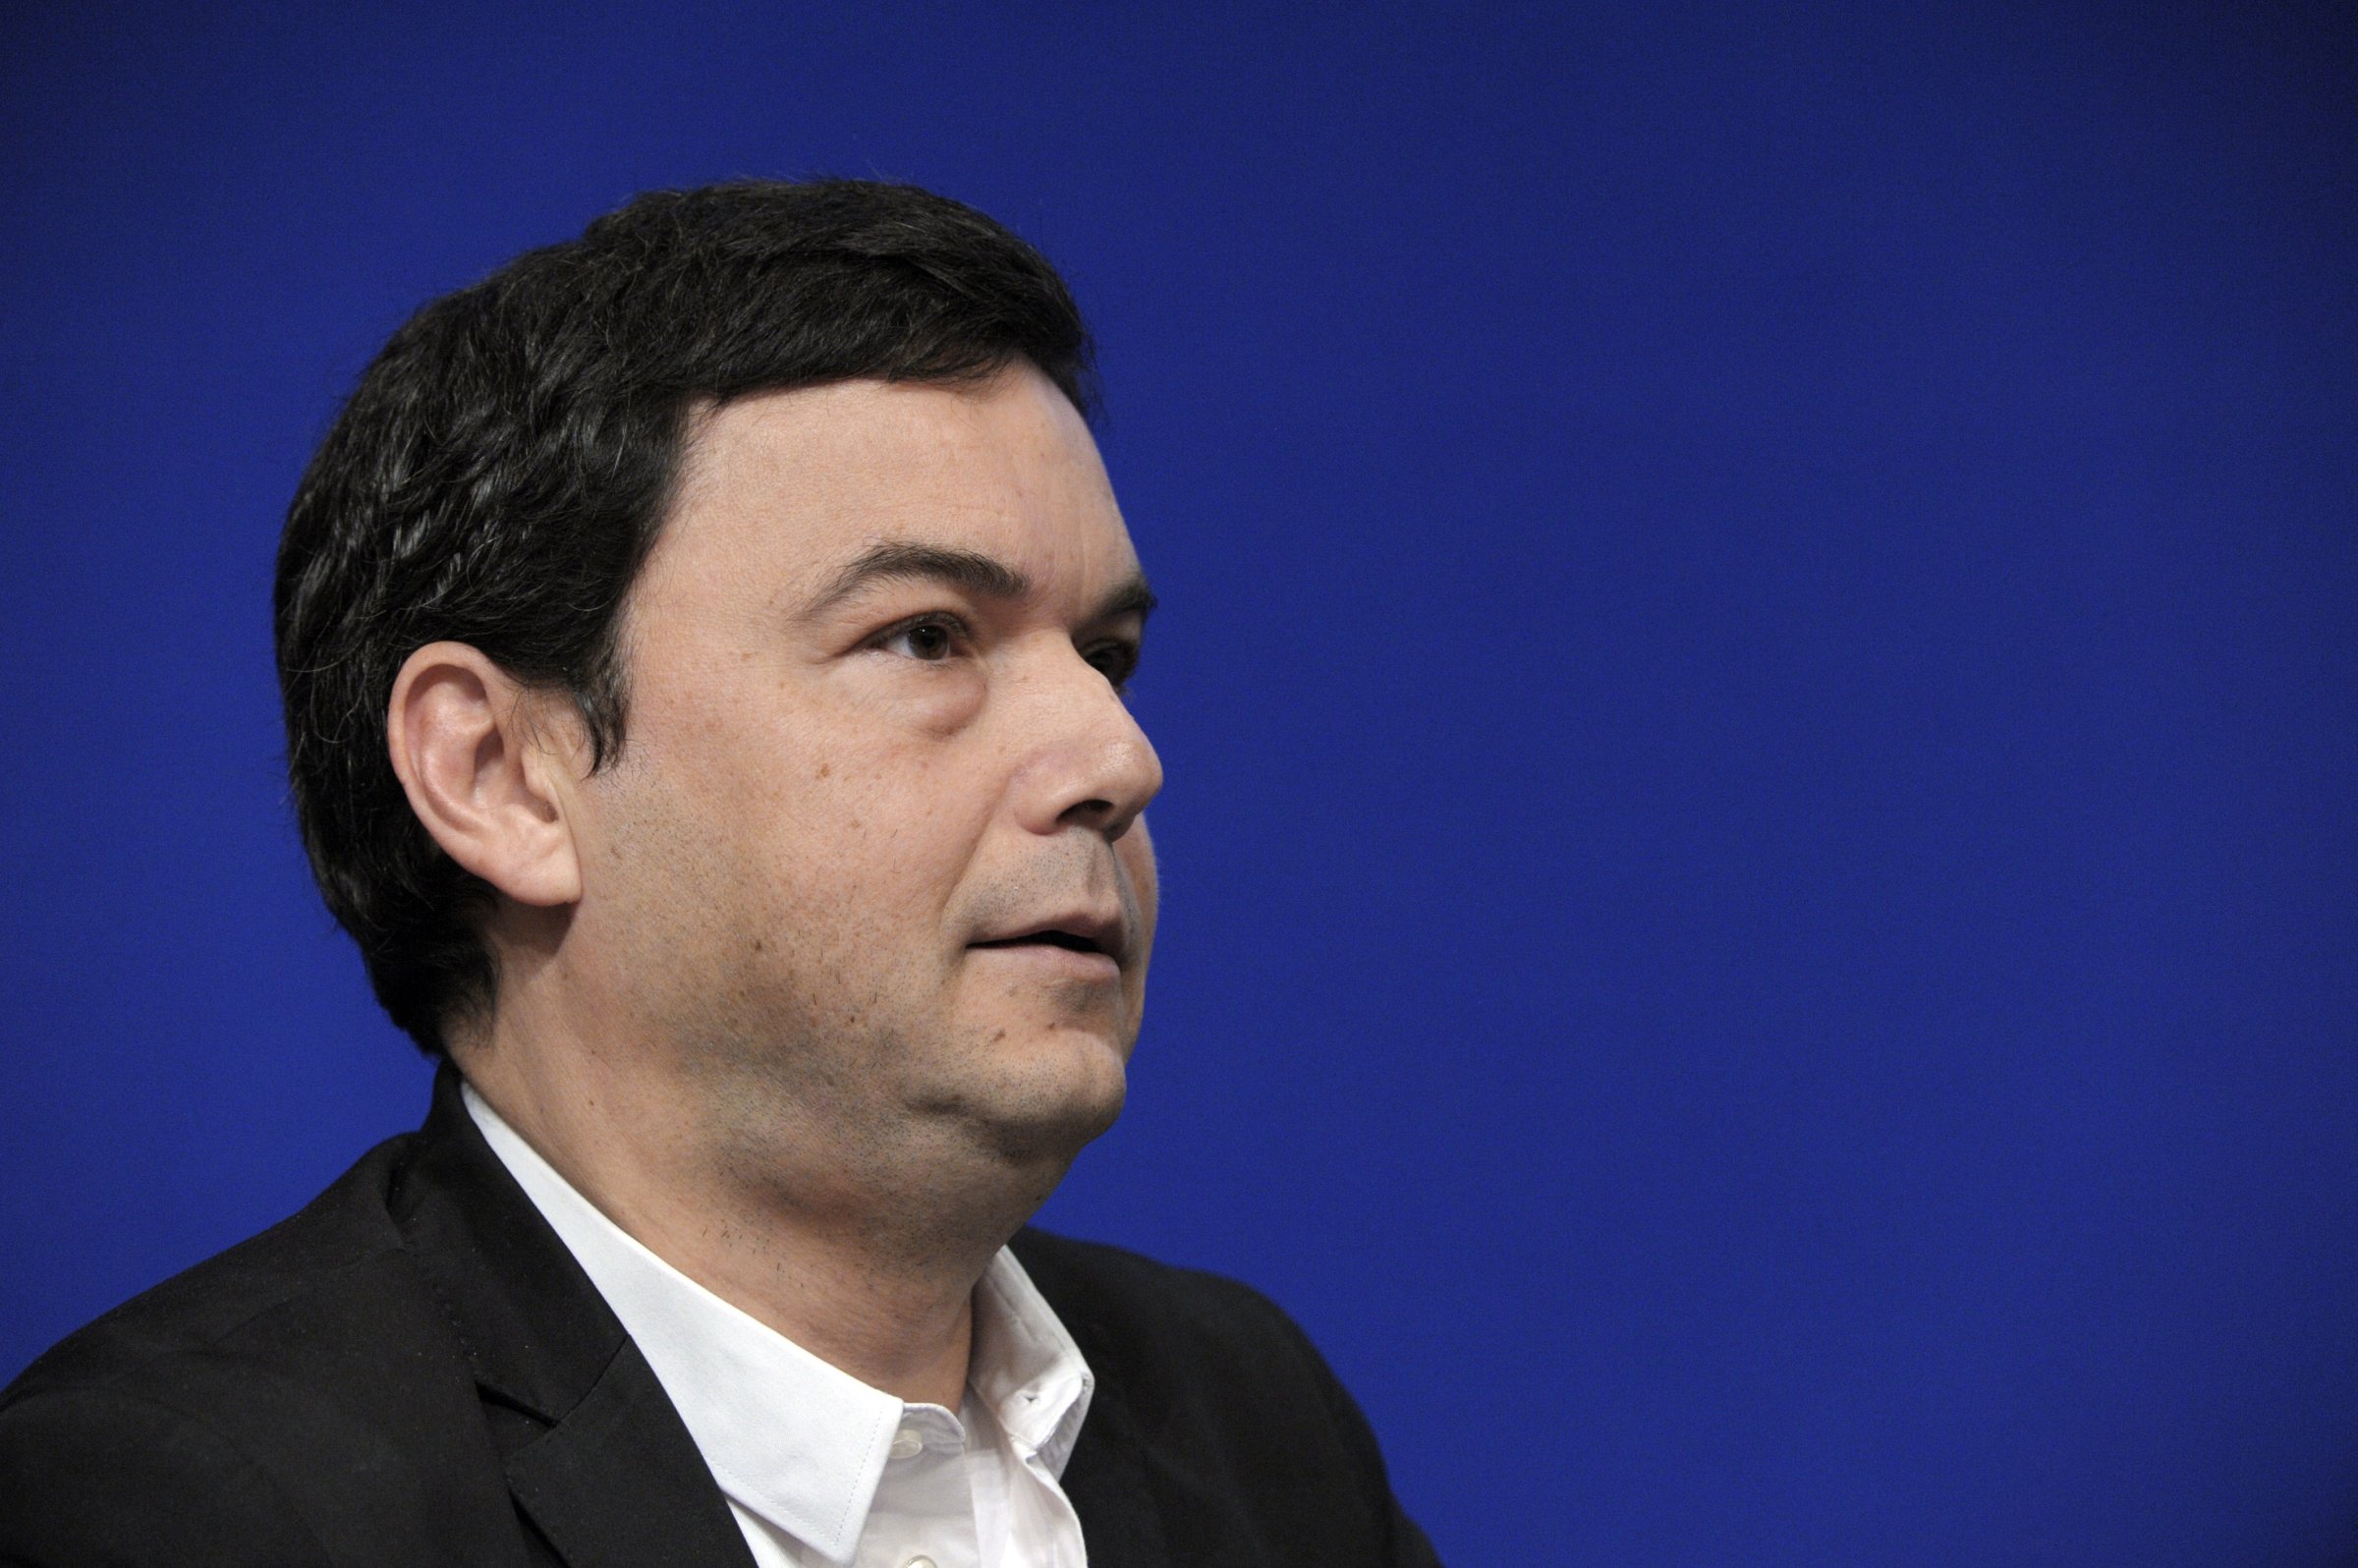 French economist Thomas Piketty at the symposium Les Entretiens du Tresor at the Economy Ministry in Paris on Jan. 23, 2015.